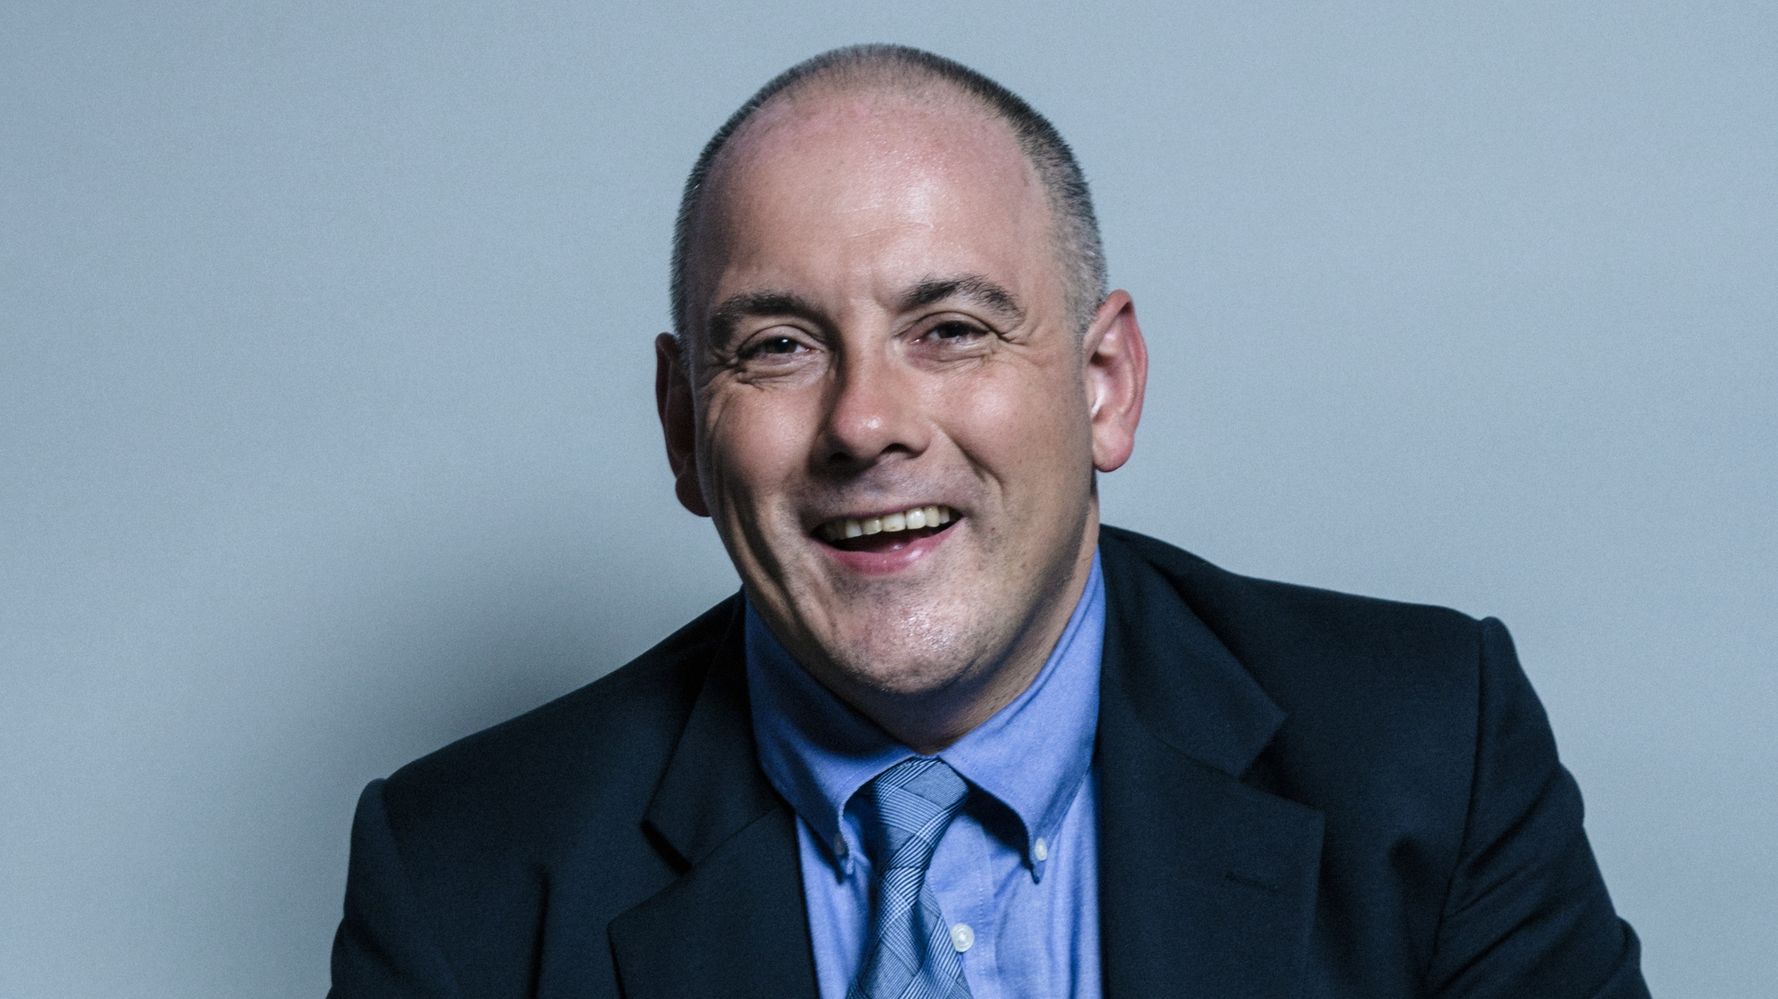 Robert Halfon: Prisons Need A Root-And-Branch Culture Change With Education At The Heart